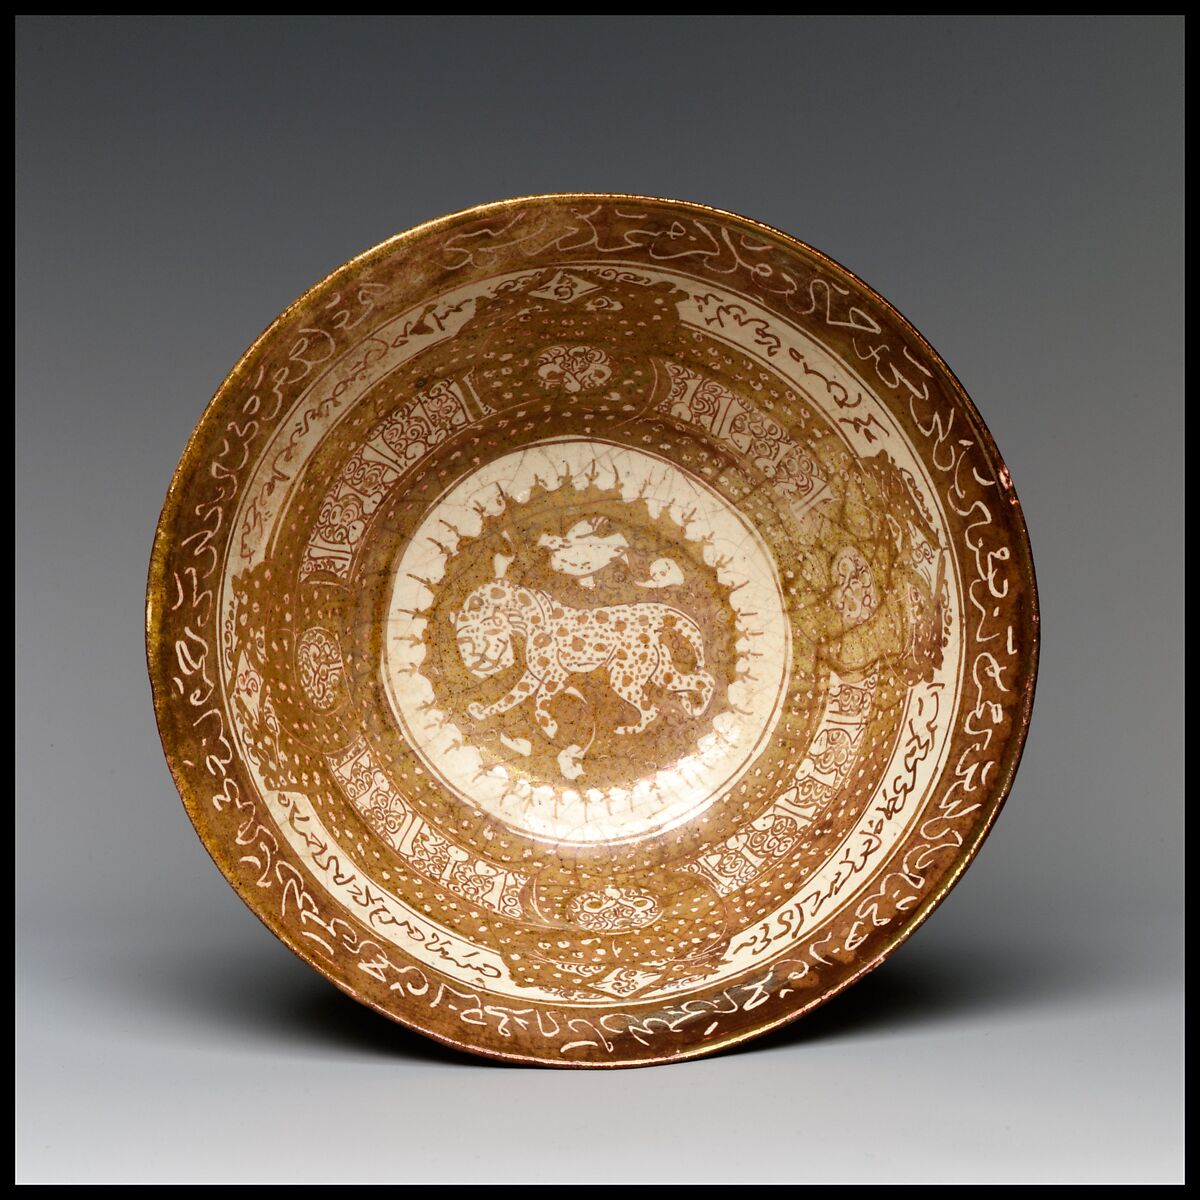 Bowl with Leopard